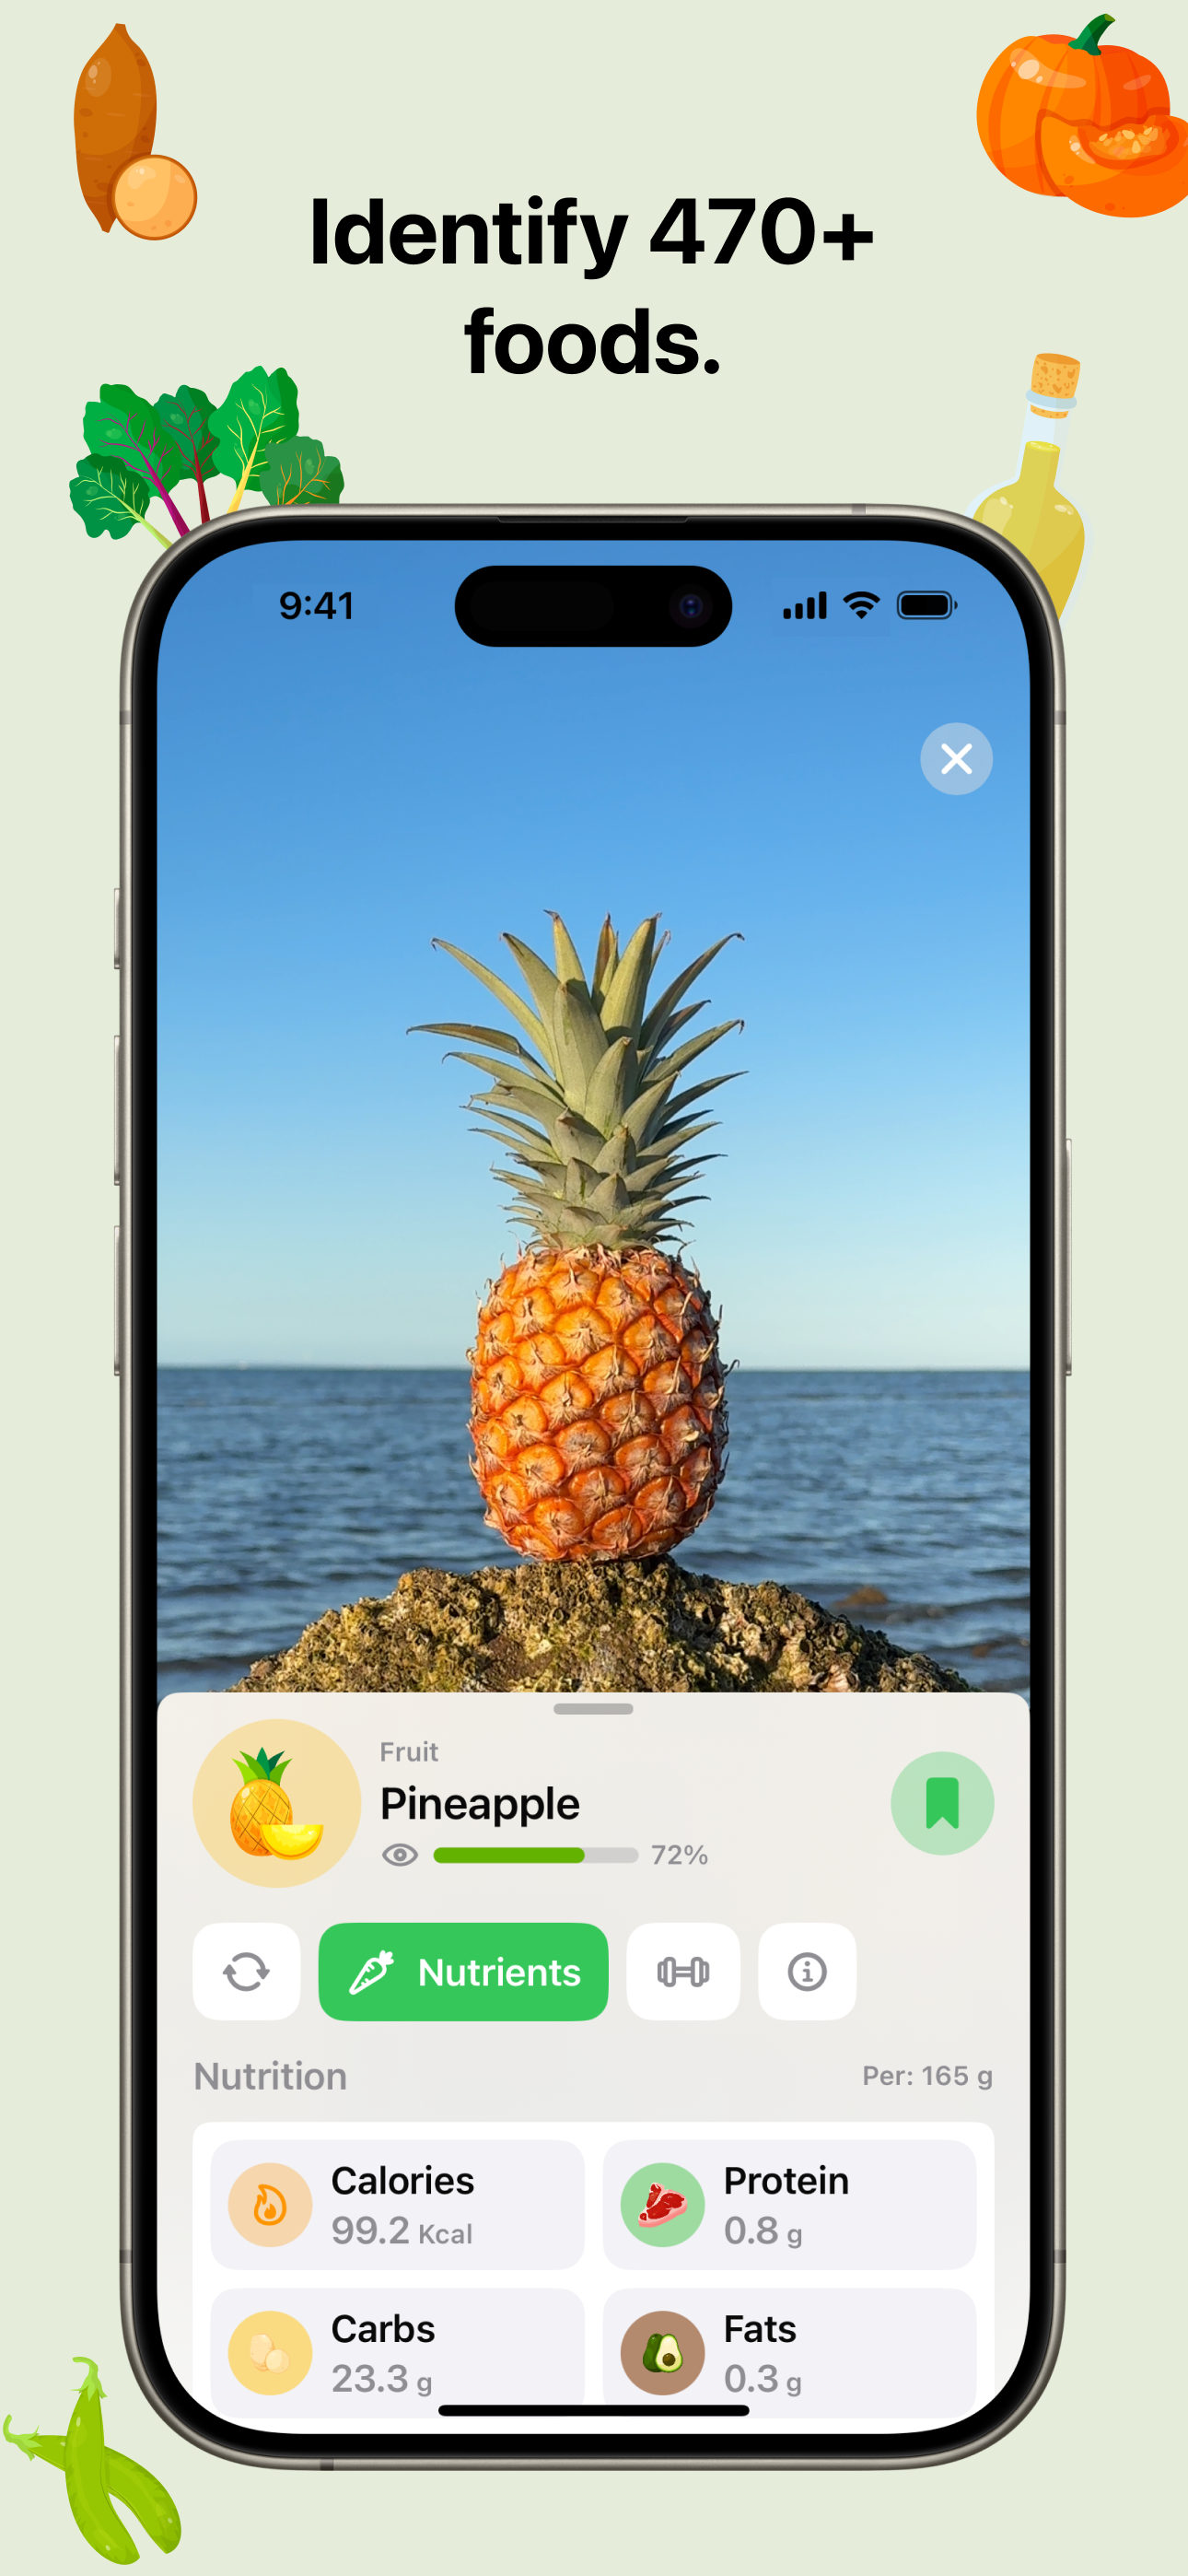 Nutrify app screenshot: A smartphone screen showing the result of identifying a pineapple using the app. The title reads 'Identify 470+ foods.' The app provides details about the pineapple, including that it is a fruit, with 72% confidence. Nutritional information is displayed: 99.2 kcal, 0.8g protein, 23.3g carbs, and 0.3g fats per 165g serving. The background is light green with various vegetable icons.